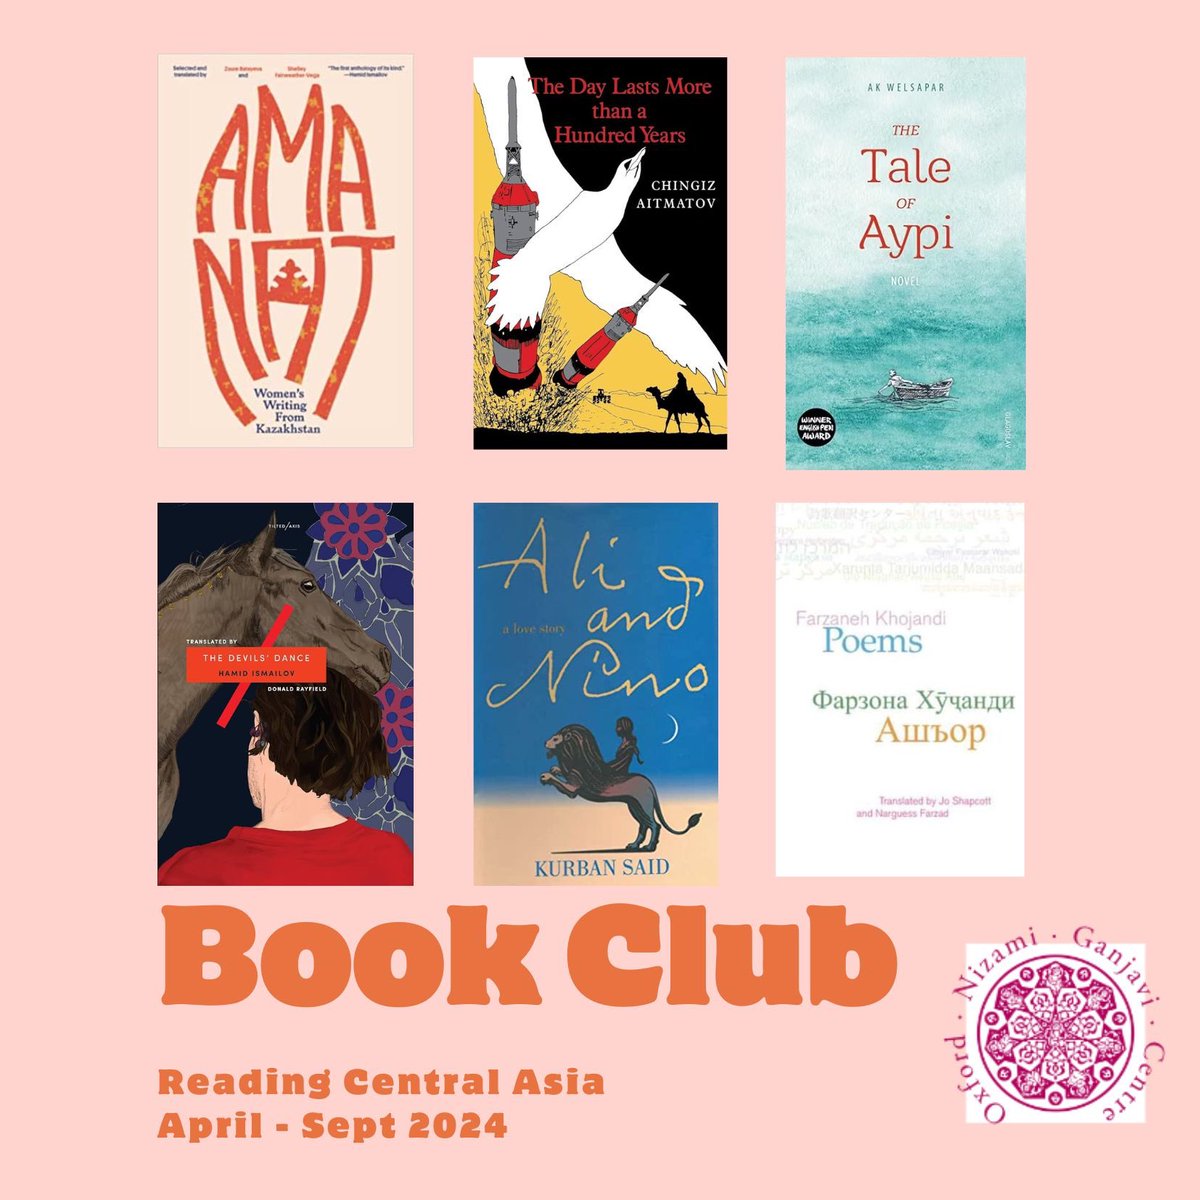 Join the read! One book a month the next 6 months. Book Club of Central Asian Postcolonial Literature - April - September 2024! Hybrid - online and in- person Read along and follow for discussion updates! Registration link: forms.office.com/e/q1uphiuS5p Dates and titles 👇🏾